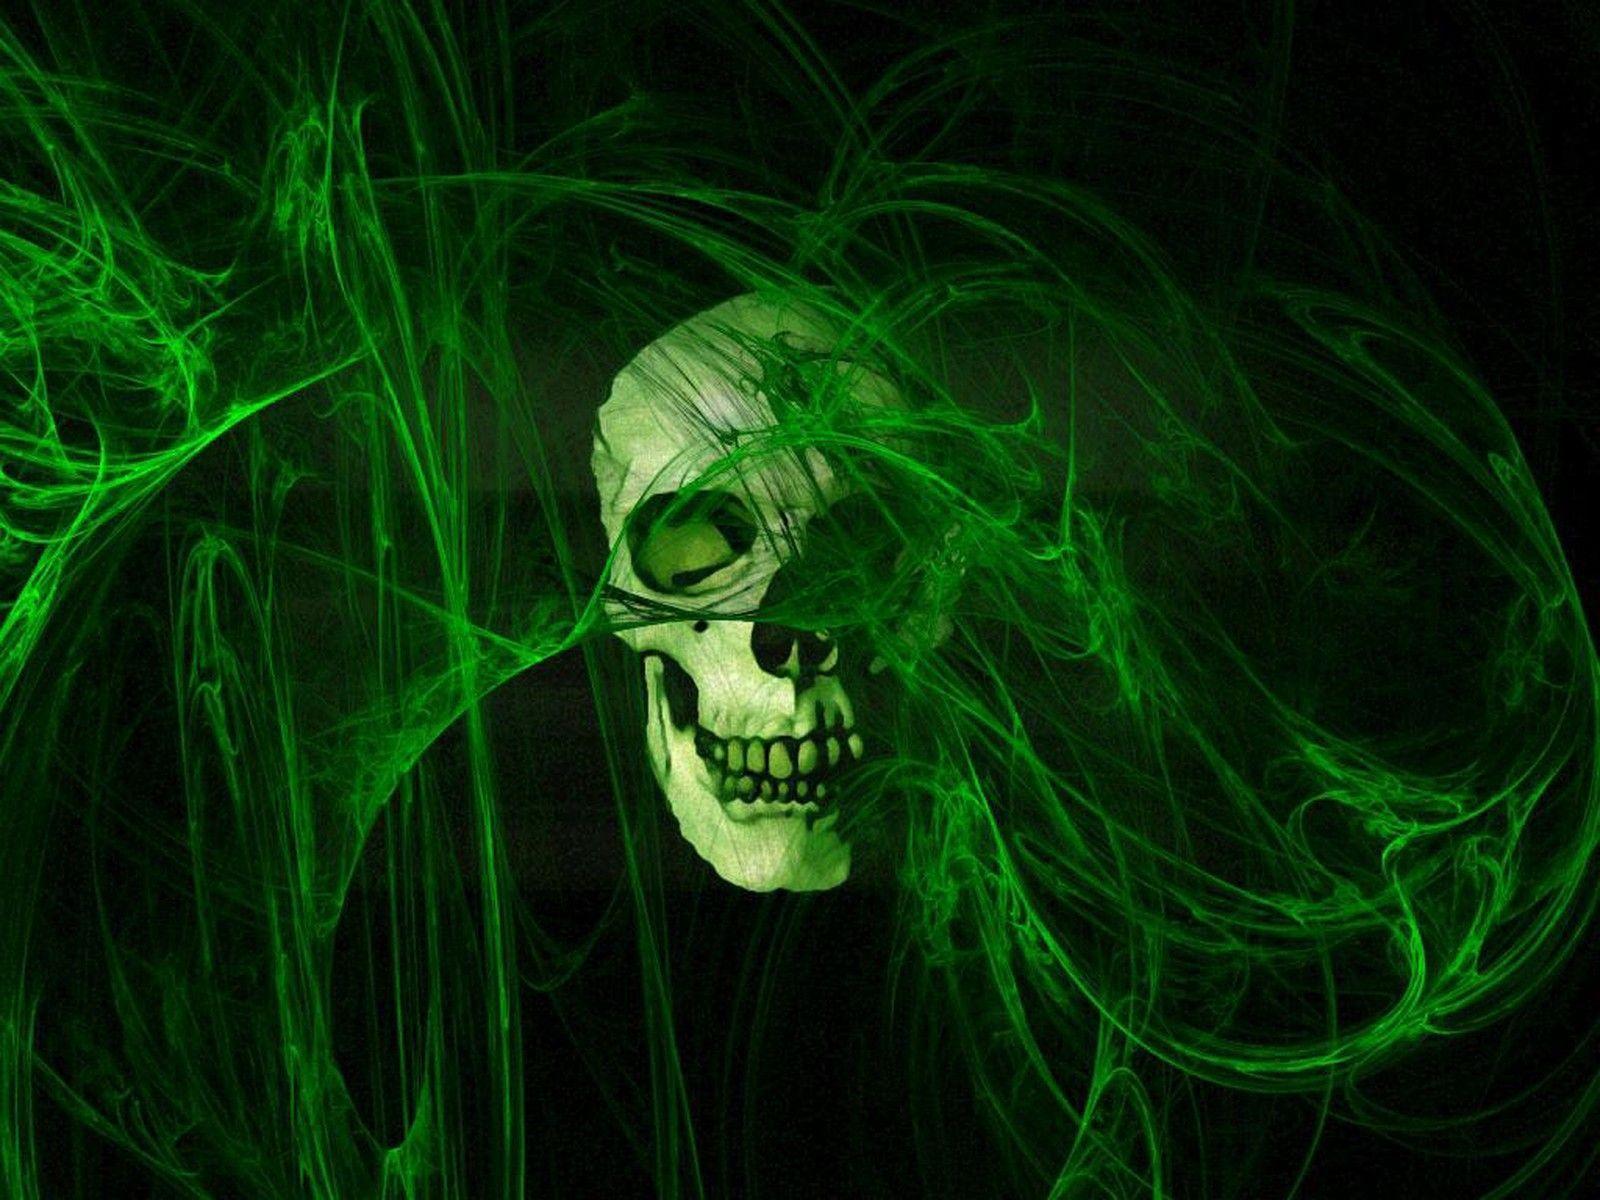 Animated Skull Wallpapers - Top Free ...